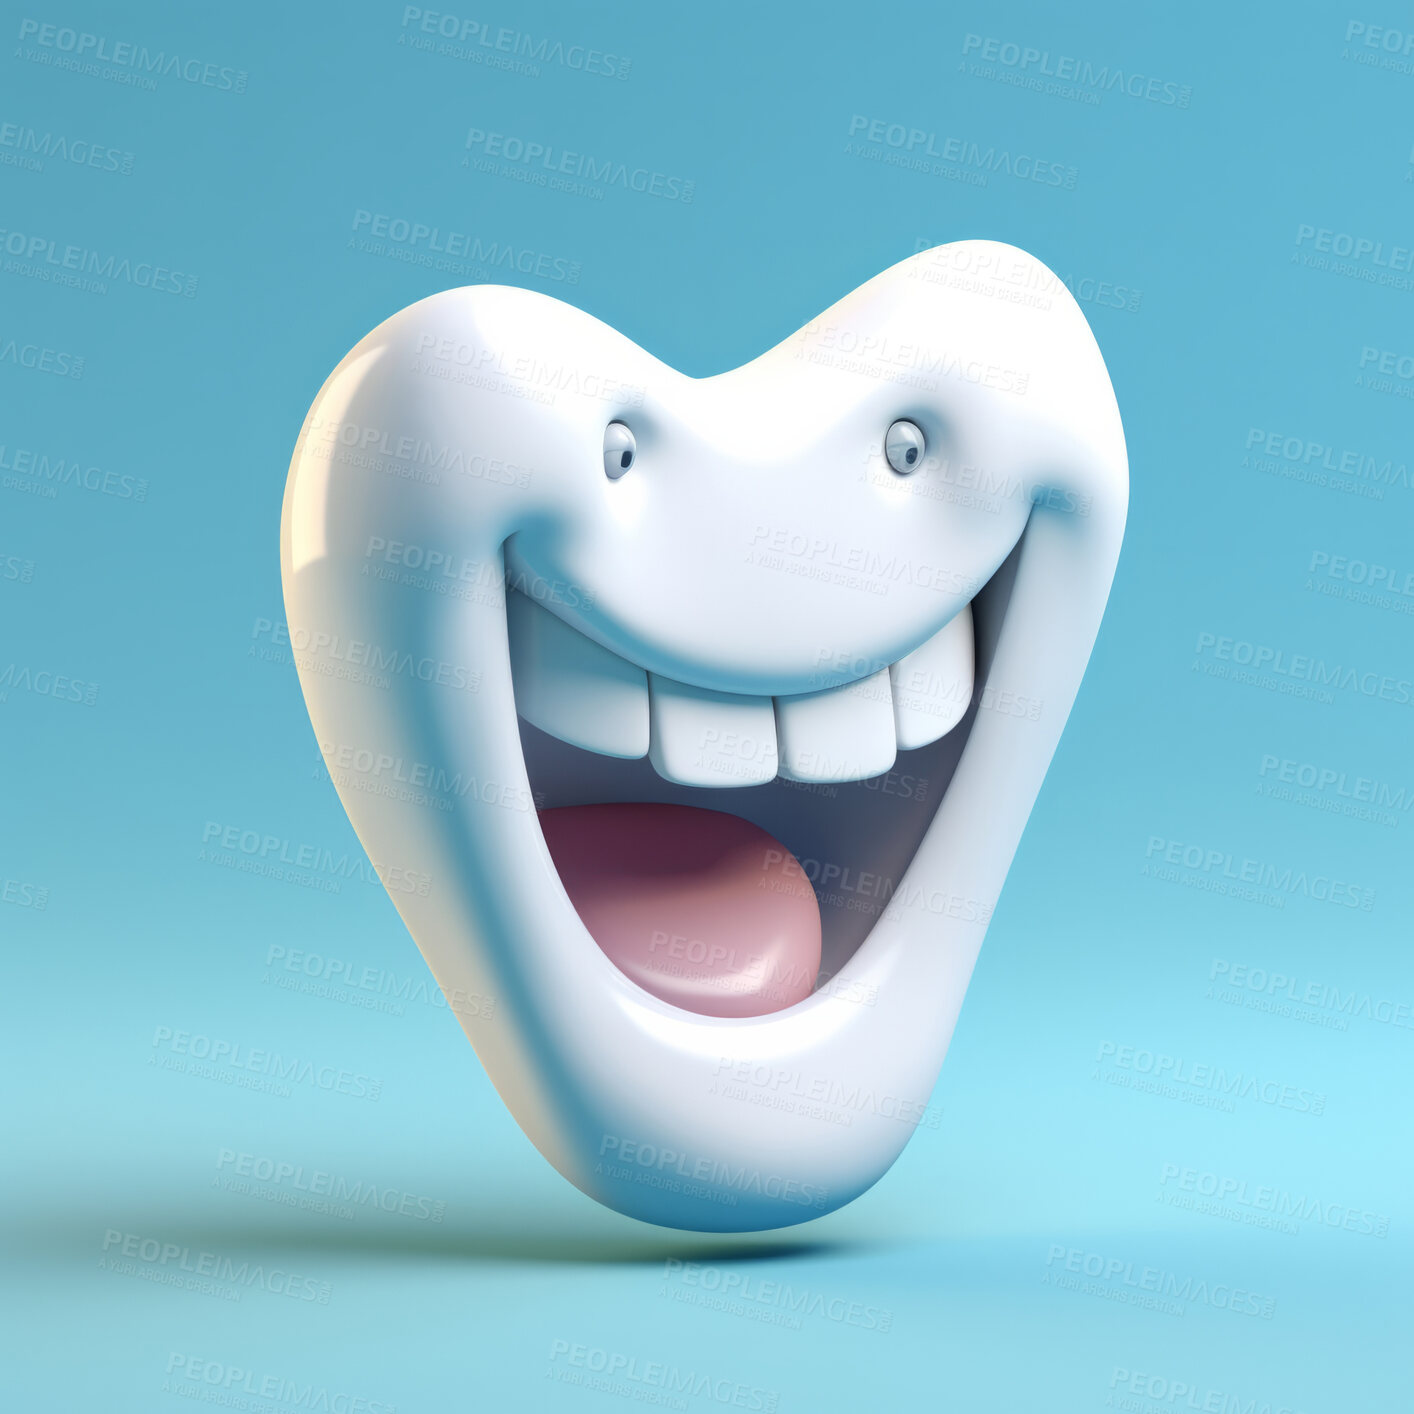 Buy stock photo 3d smiling tooth cartoon on blue copyspace background. Professional dental hygiene concept.